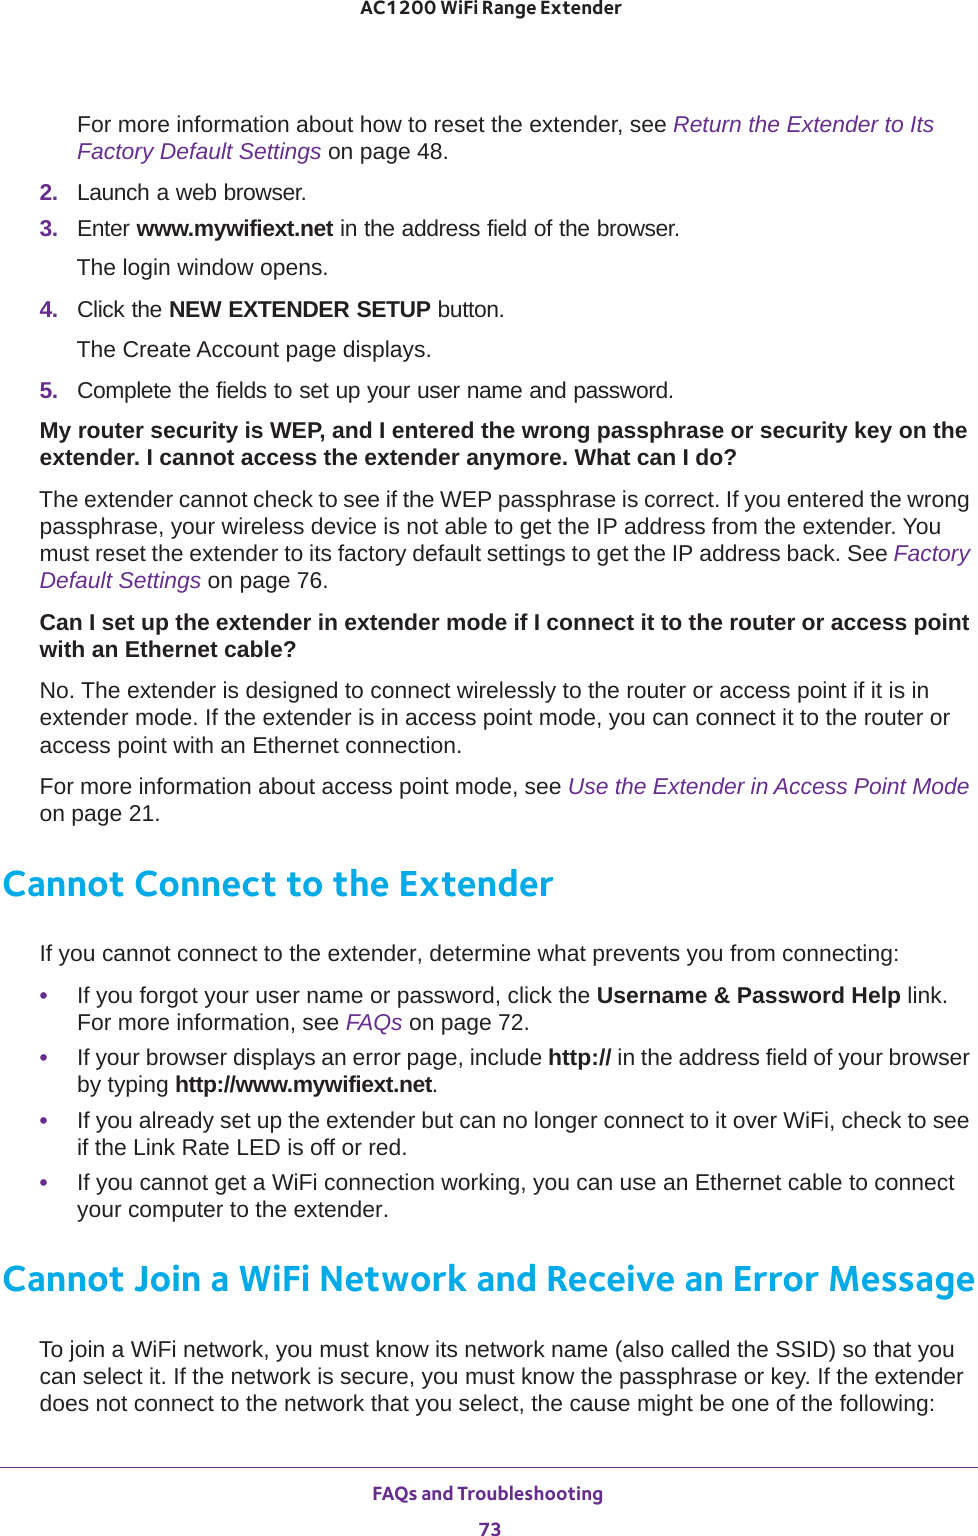 FAQs and Troubleshooting 73 AC1200 WiFi Range ExtenderFor more information about how to reset the extender, see Return the Extender to Its Factory Default Settings on page  48.2.  Launch a web browser.3.  Enter www.mywifiext.net in the address field of the browser.The login window opens.4.  Click the NEW EXTENDER SETUP button.The Create Account page displays.5.  Complete the fields to set up your user name and password.My router security is WEP, and I entered the wrong passphrase or security key on the extender. I cannot access the extender anymore. What can I do?The extender cannot check to see if the WEP passphrase is correct. If you entered the wrong passphrase, your wireless device is not able to get the IP address from the extender. You must reset the extender to its factory default settings to get the IP address back. See Factory Default Settings on page  76.Can I set up the extender in extender mode if I connect it to the router or access point with an Ethernet cable?No. The extender is designed to connect wirelessly to the router or access point if it is in extender mode. If the extender is in access point mode, you can connect it to the router or access point with an Ethernet connection.For more information about access point mode, see Use the Extender in Access Point Mode on page  21.Cannot Connect to the ExtenderIf you cannot connect to the extender, determine what prevents you from connecting:•If you forgot your user name or password, click the Username &amp; Password Help link. For more information, see FAQs on page  72.•If your browser displays an error page, include http:// in the address field of your browser by typing http://www.mywifiext.net.•If you already set up the extender but can no longer connect to it over WiFi, check to see if the Link Rate LED is off or red.•If you cannot get a WiFi connection working, you can use an Ethernet cable to connect your computer to the extender. Cannot Join a WiFi Network and Receive an Error MessageTo join a WiFi network, you must know its network name (also called the SSID) so that you can select it. If the network is secure, you must know the passphrase or key. If the extender does not connect to the network that you select, the cause might be one of the following: